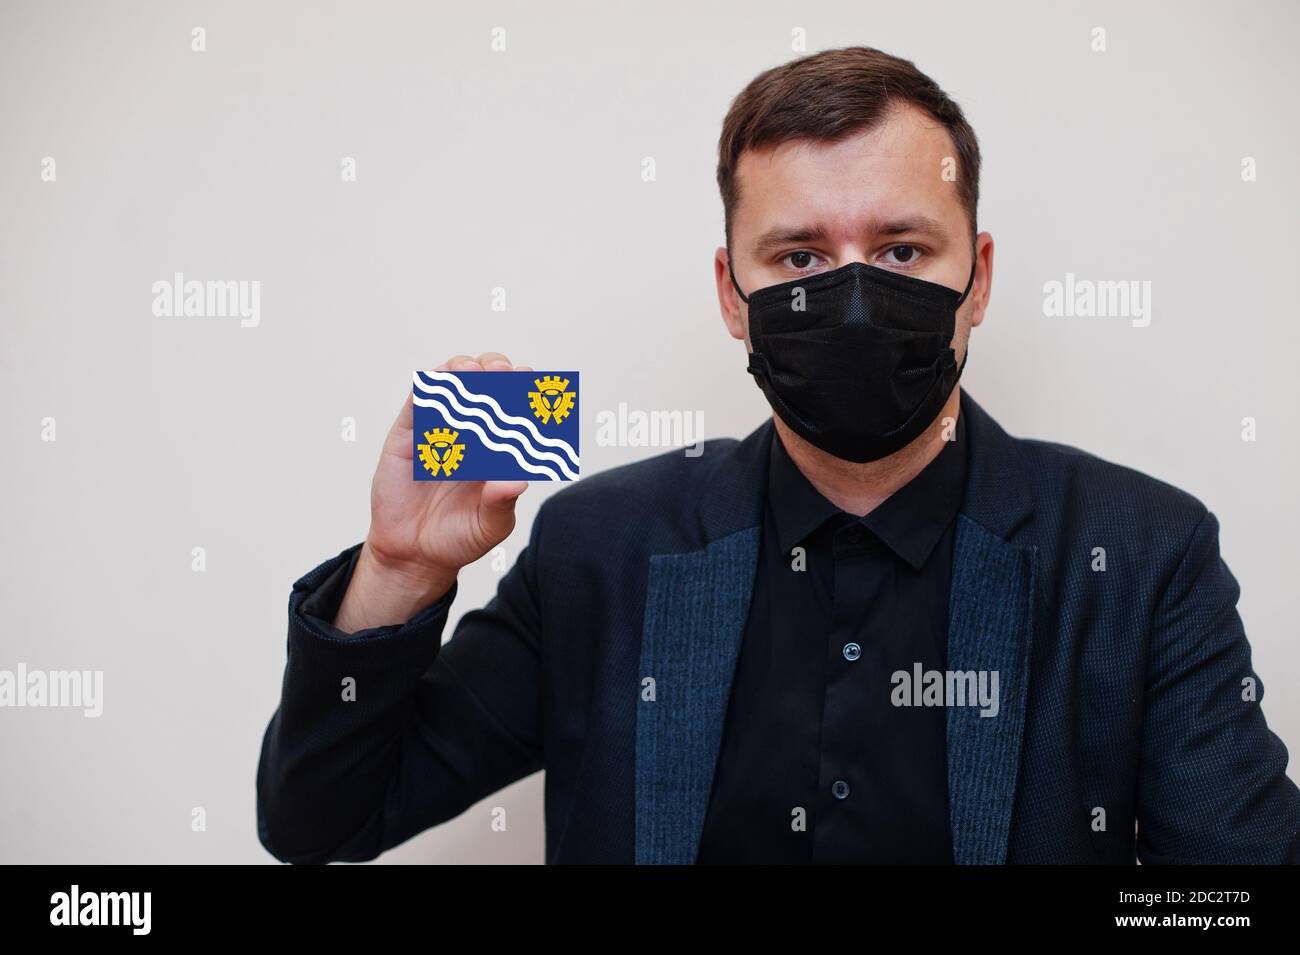 Man wear black formal and protect face mask, hold Merseyside flag card isolated on white background. United Kingdom counties of England coronavirus Co Stock Photo